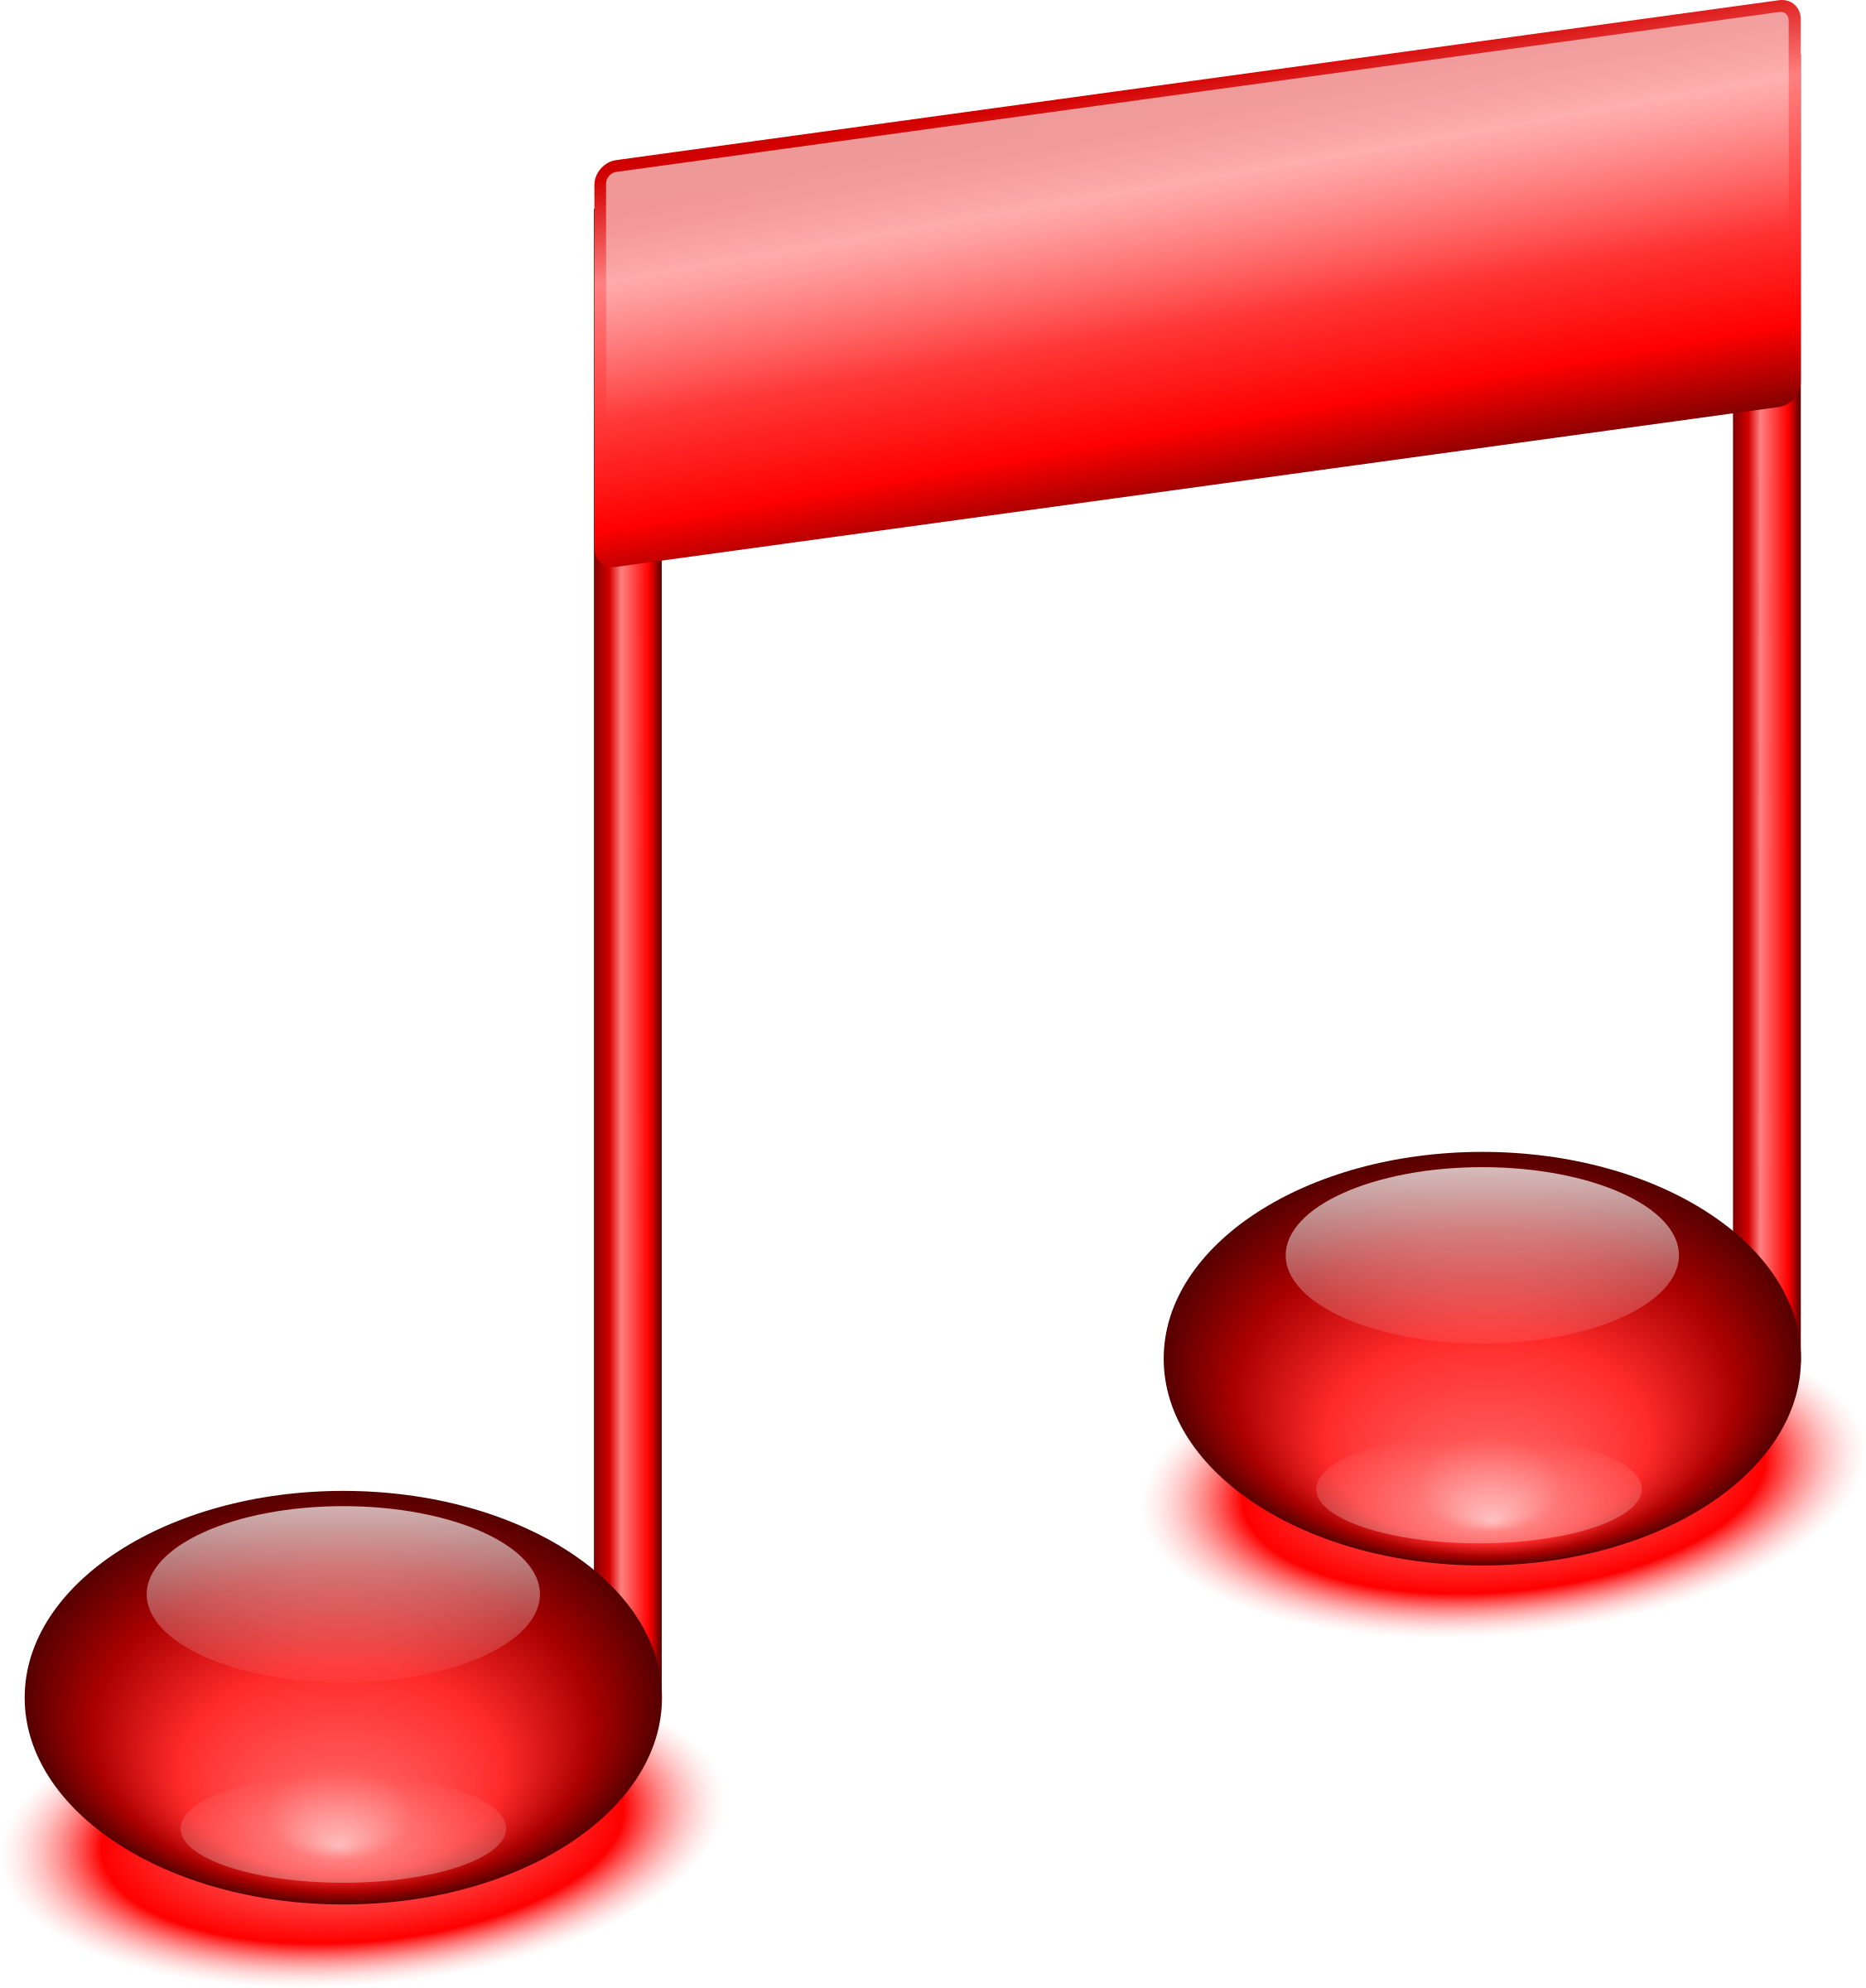 Red Music Notes Clip Art